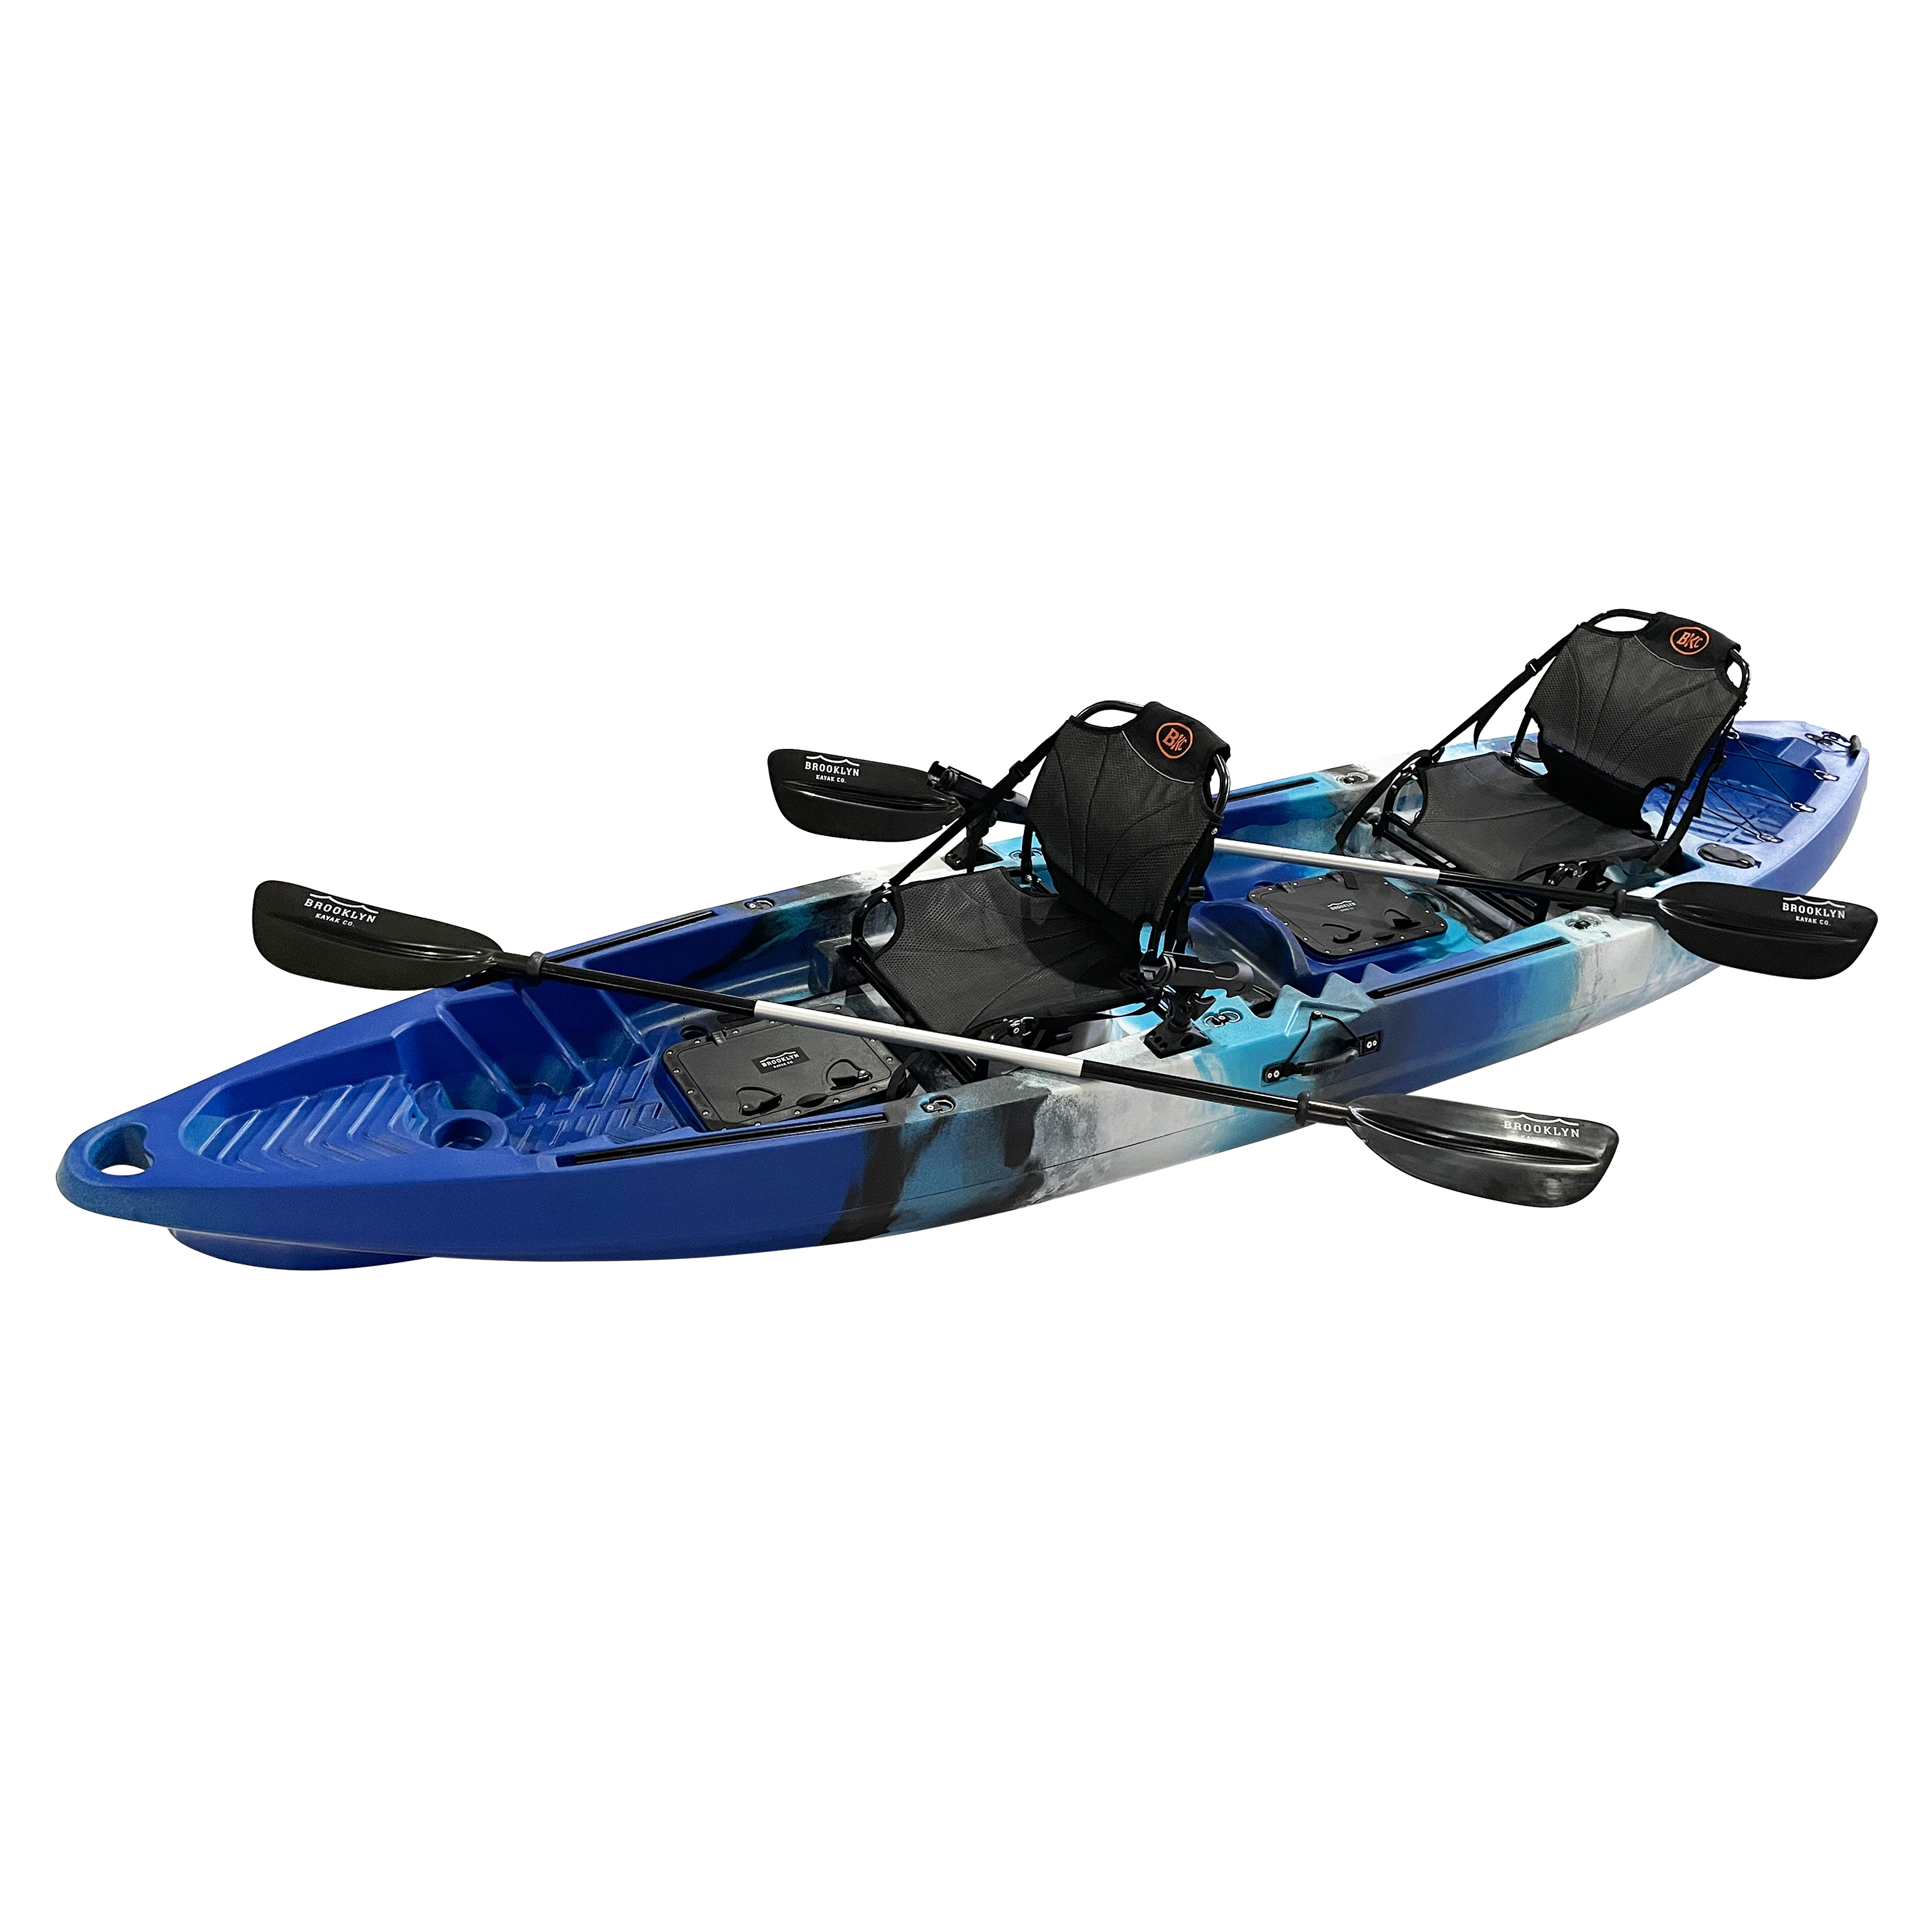 BKC TK122 Angler 12-Foot, 8 inch Tandem Sit On Top Fishing Kayak w/ Upright Aluminum Frame SEATS and Paddles, Blue